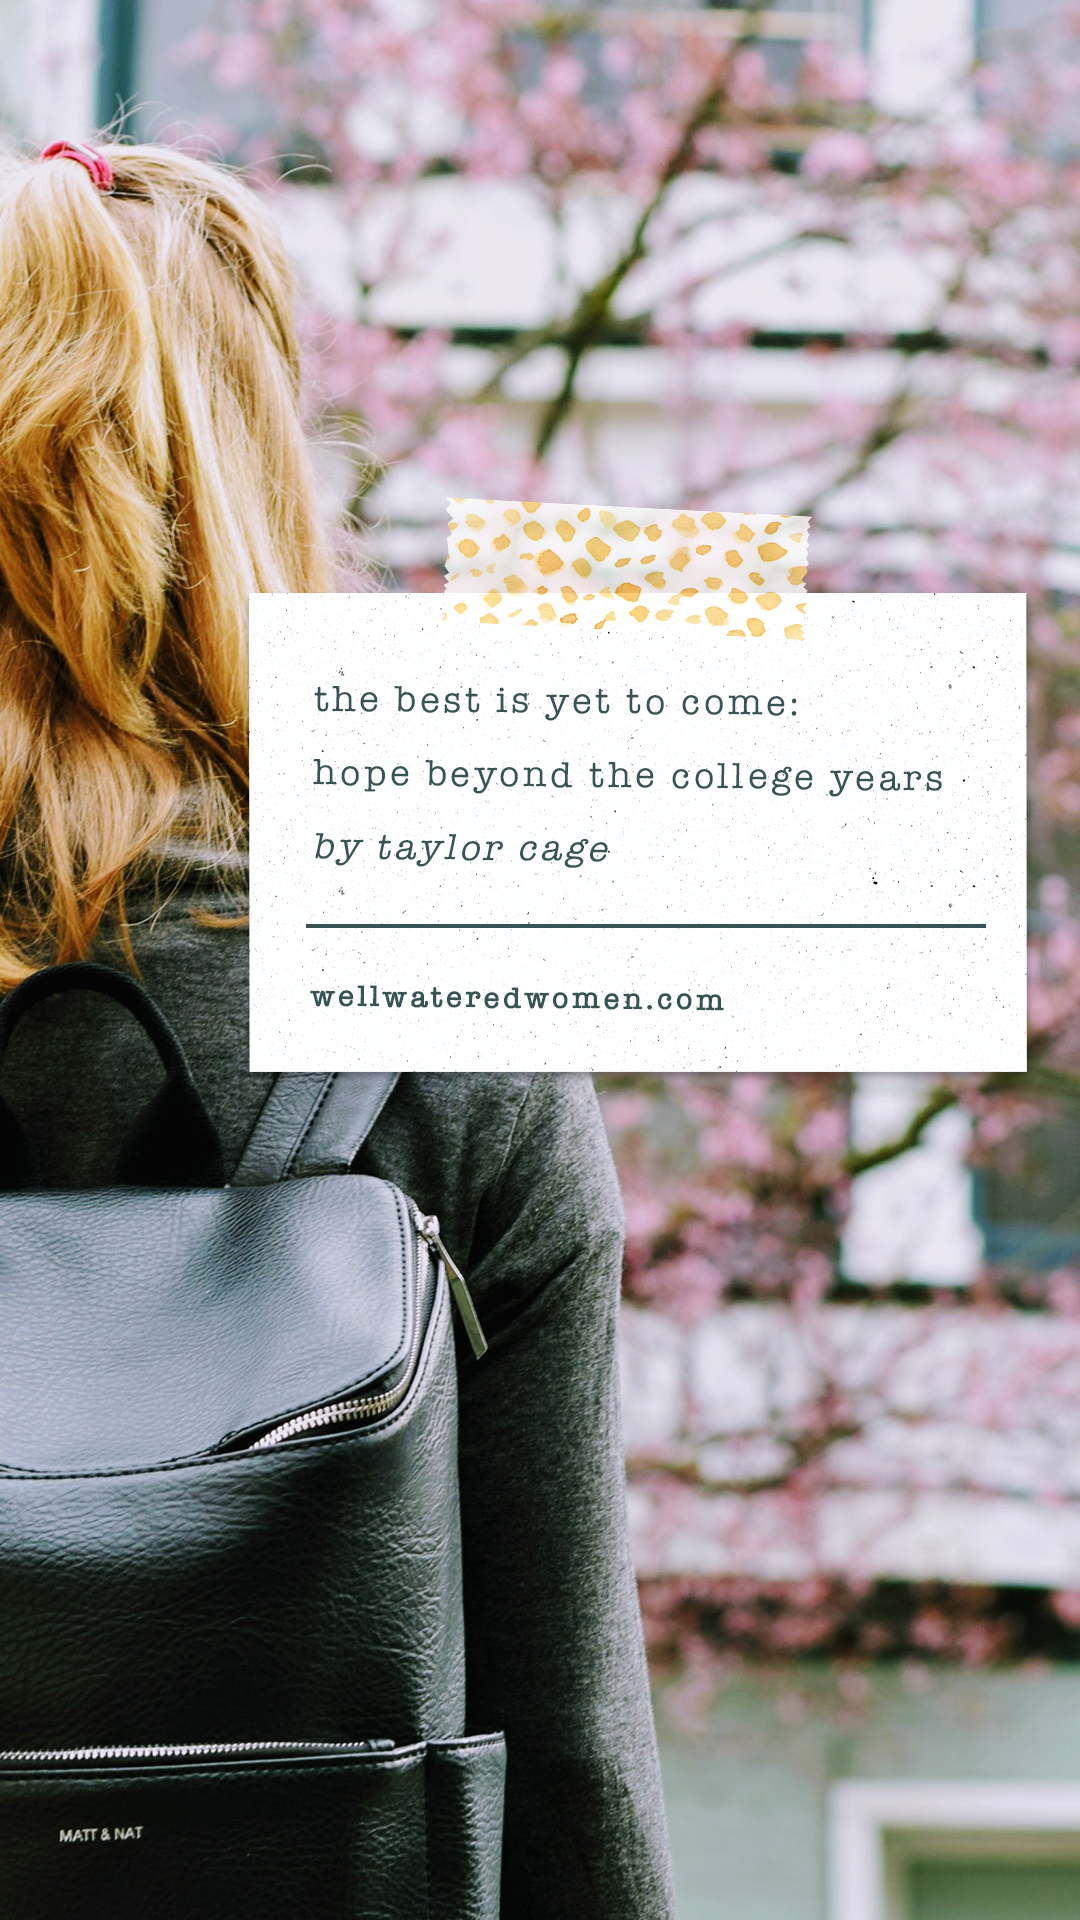 Well-Watered Women Blog | The Best is Yet to Come. Hope Beyond Your College Years